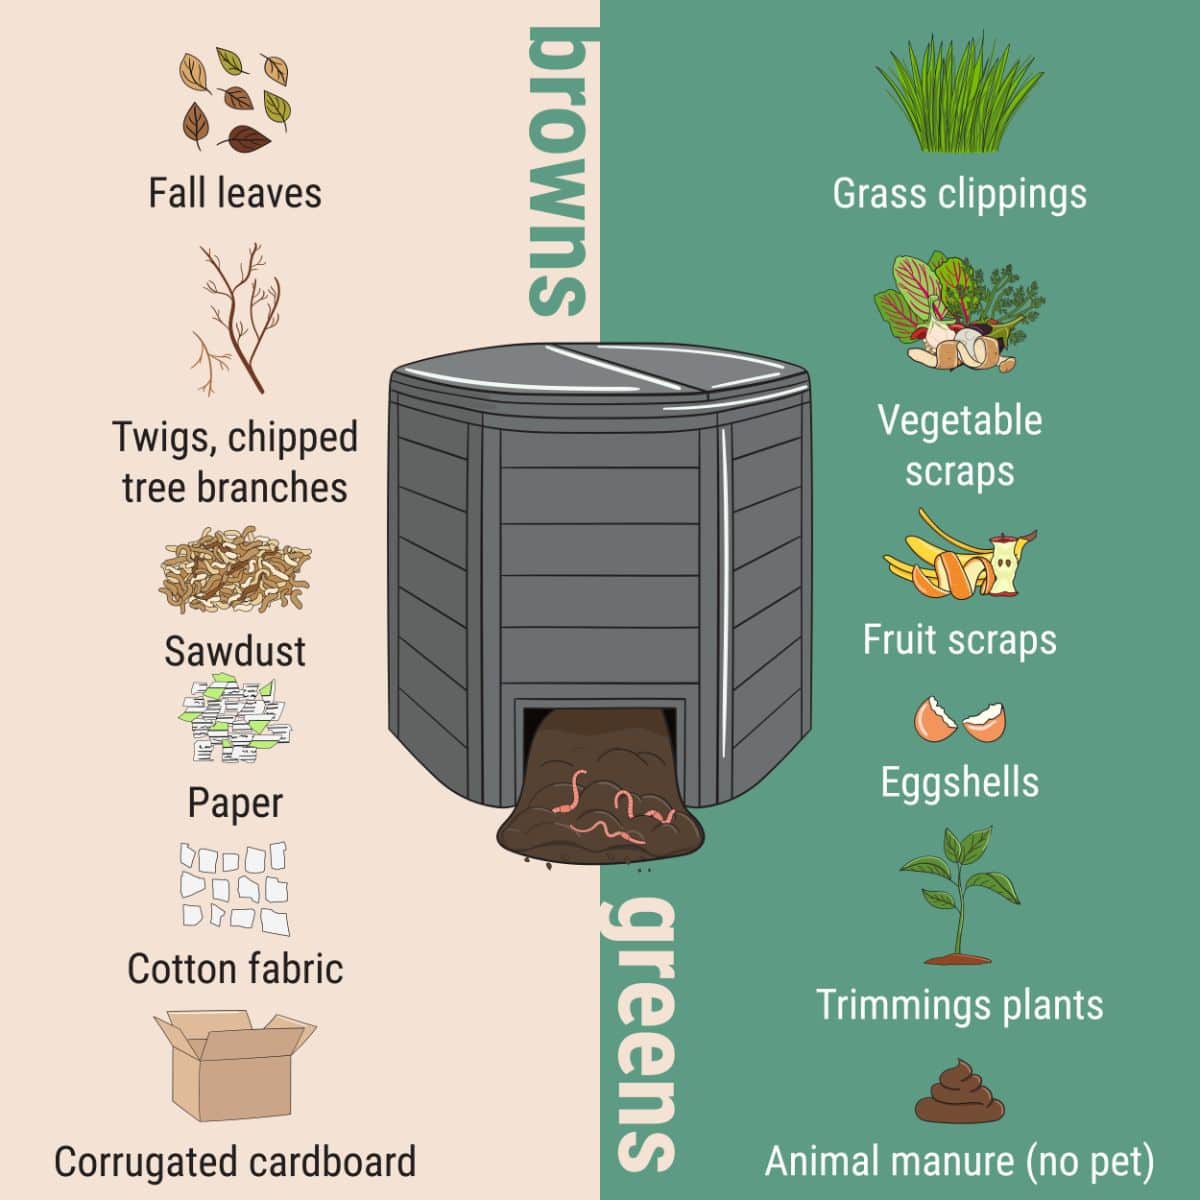 Graphic explaining nitrogen and carbon sources for the compost pile